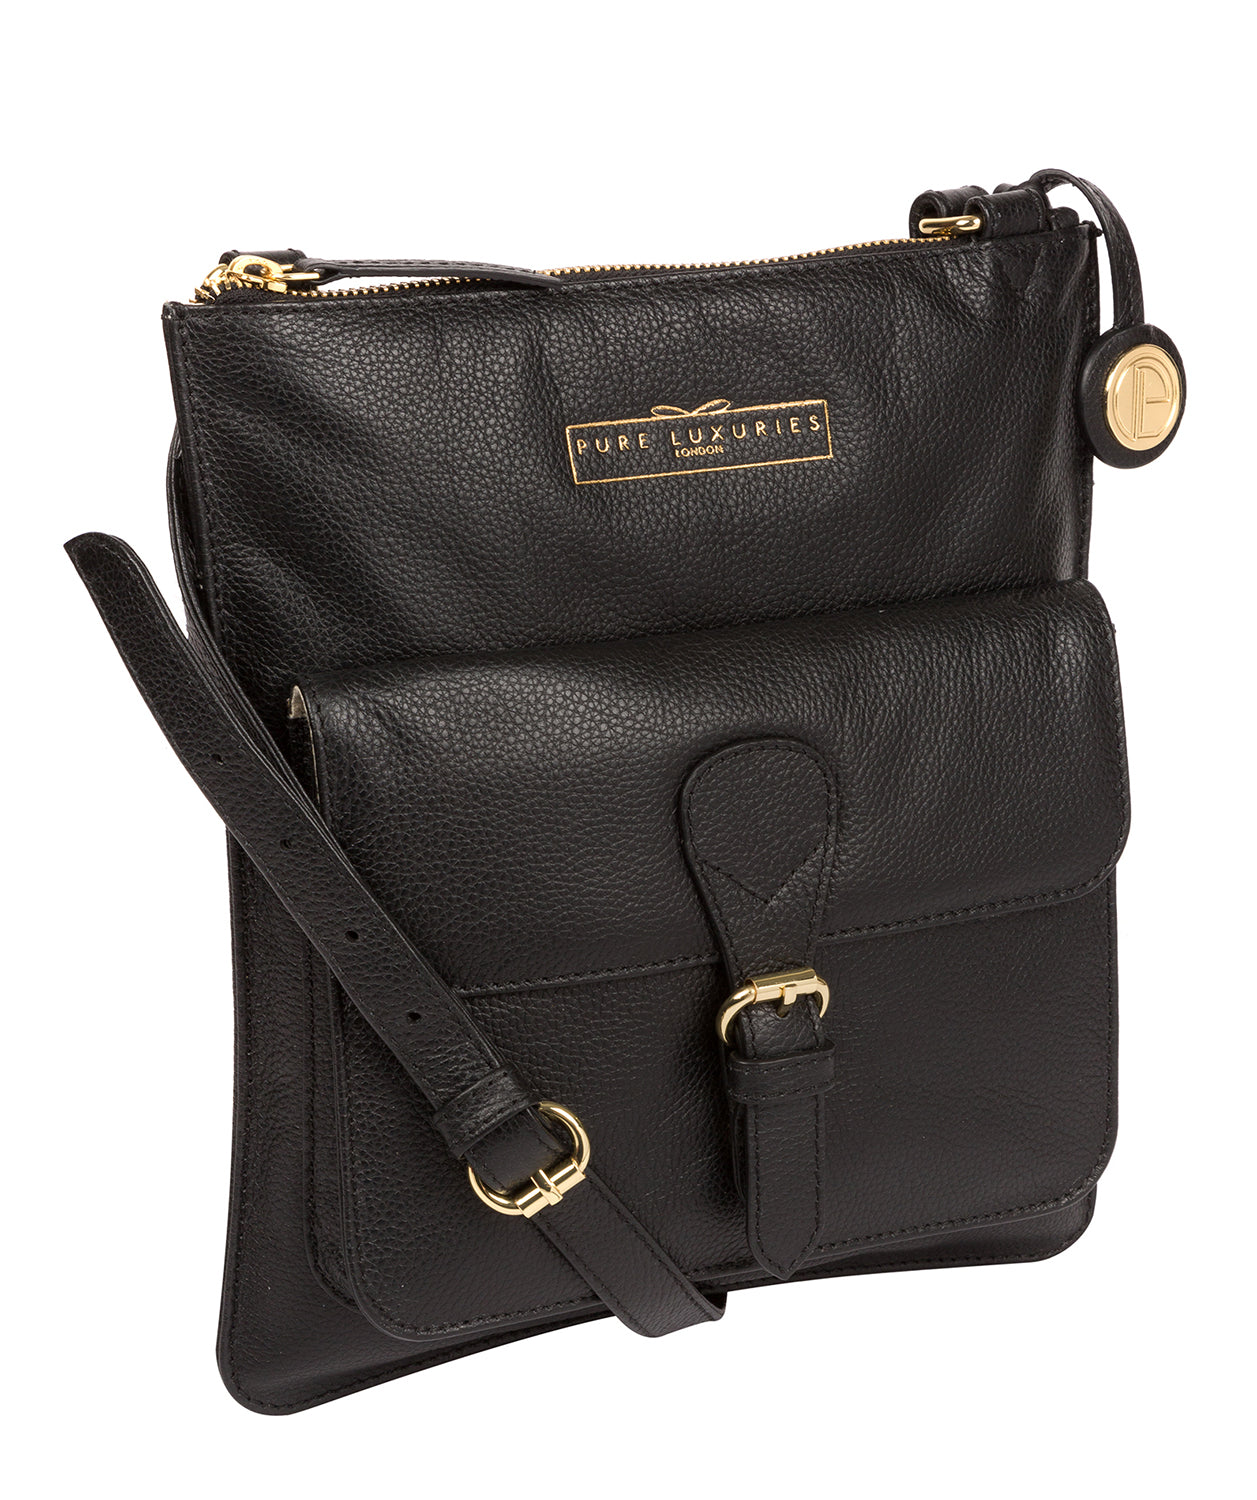 Pure Luxuries Leather Crossbody Bag Black - Kenley | Black Leather ...